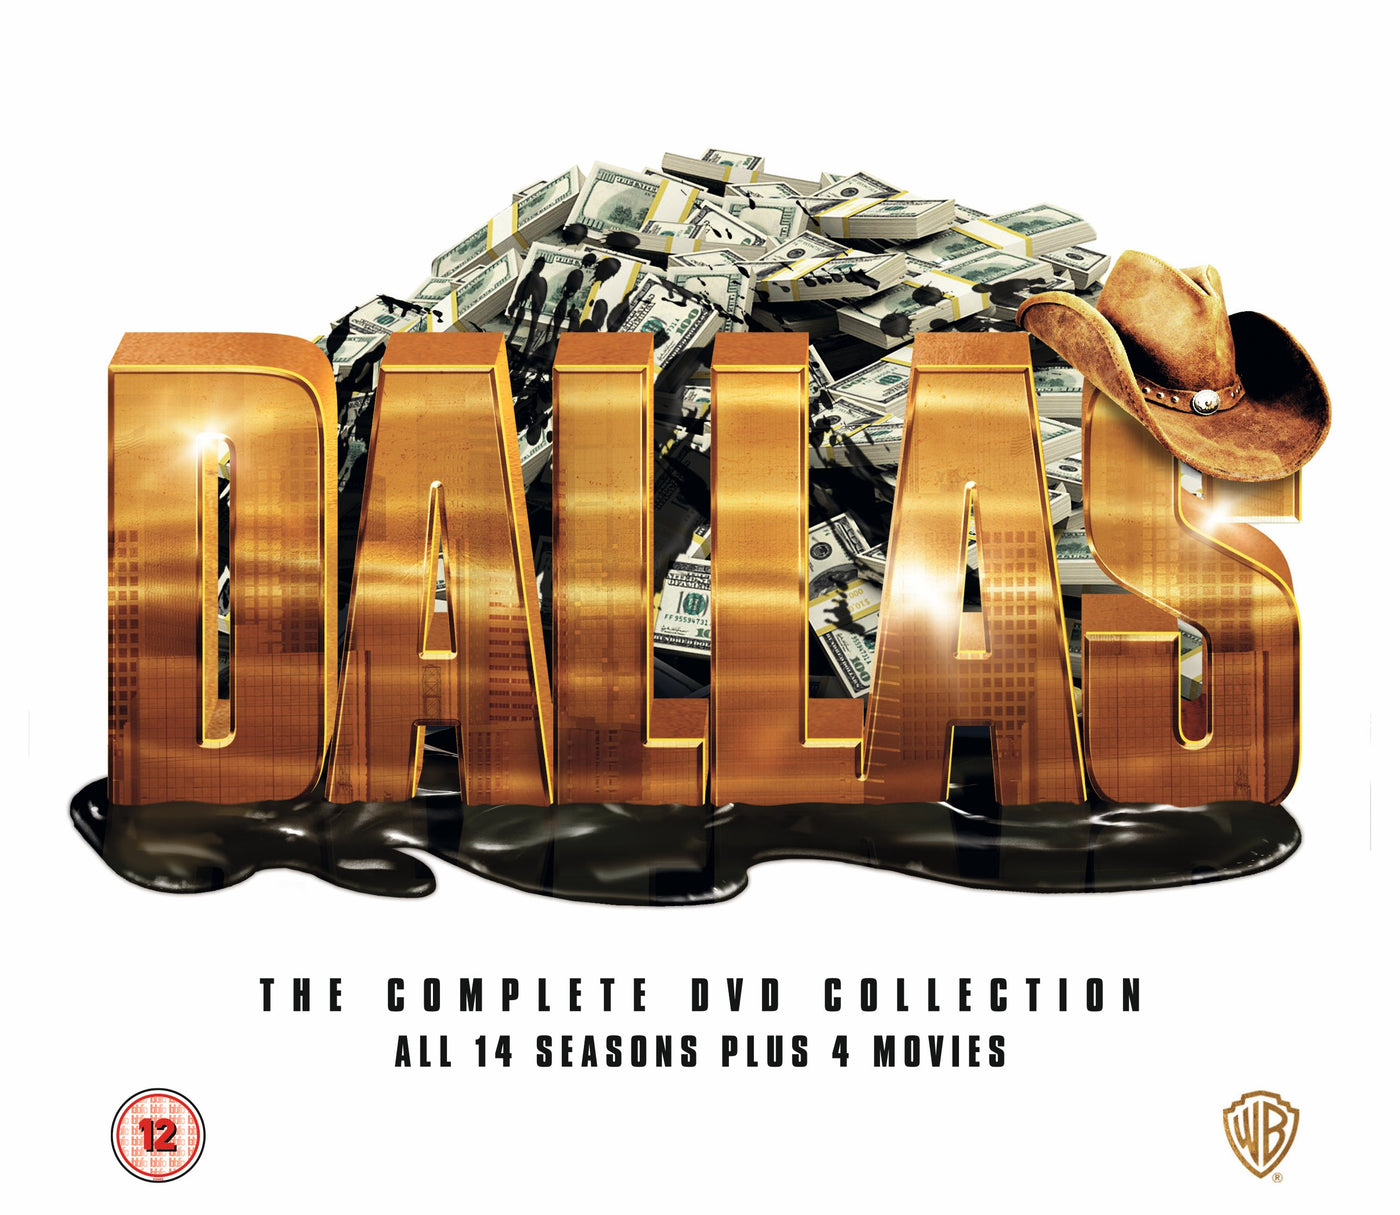 Dallas - The Complete DVD Collection 1-14 Includes 4 Movies (DVD)